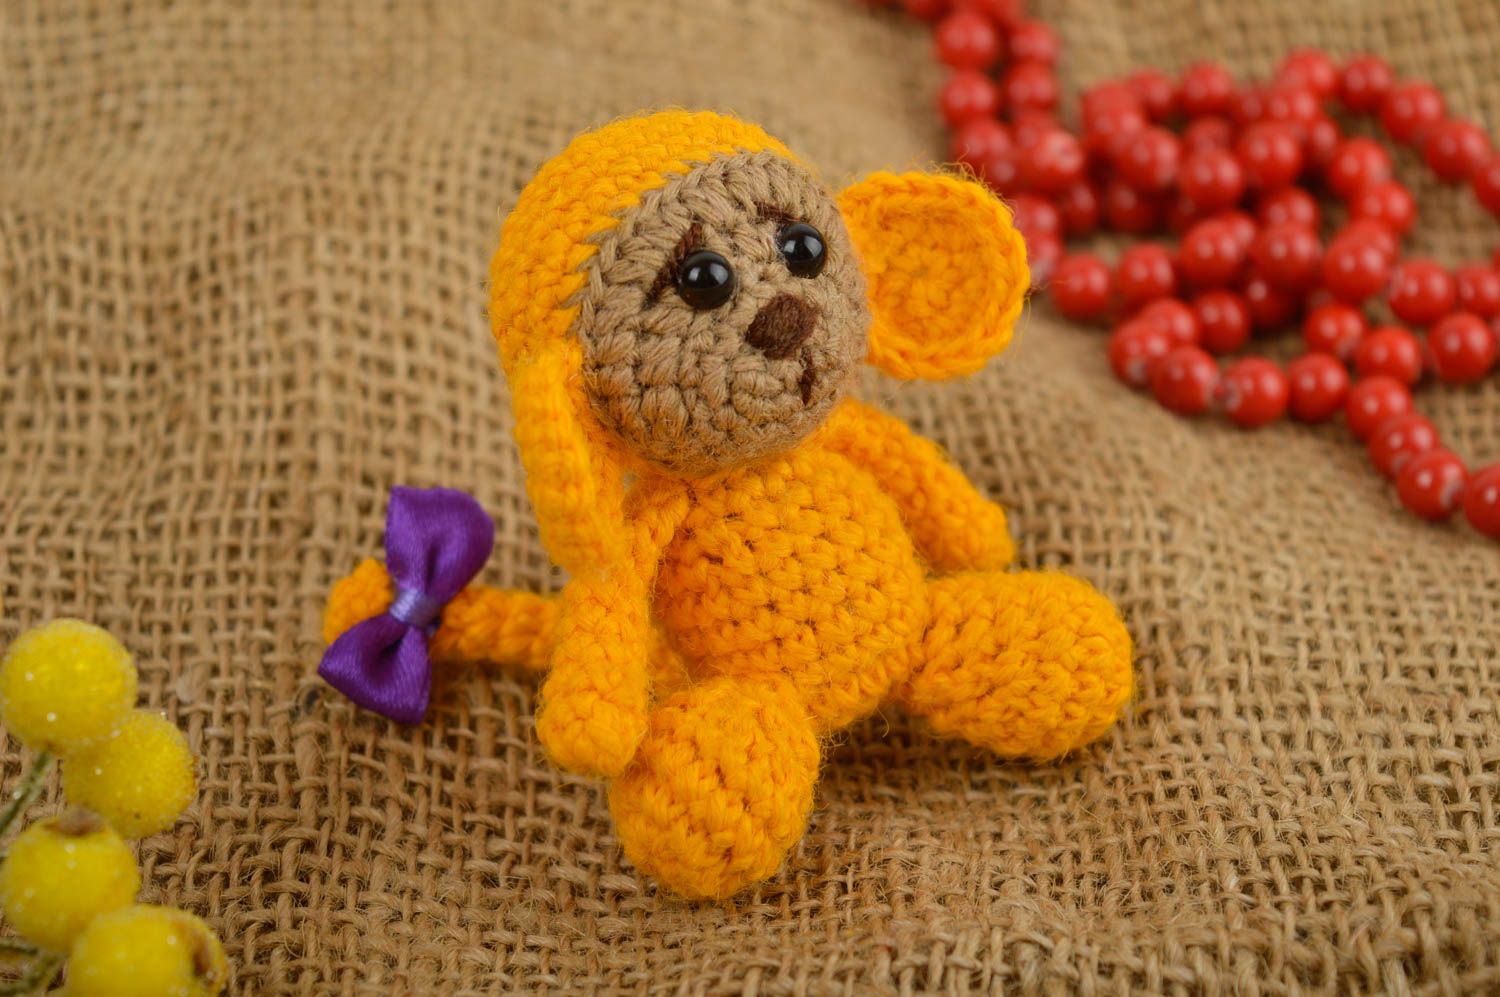 Crocheted handmade toys decorative stuffed toys for children soft toys for baby photo 1